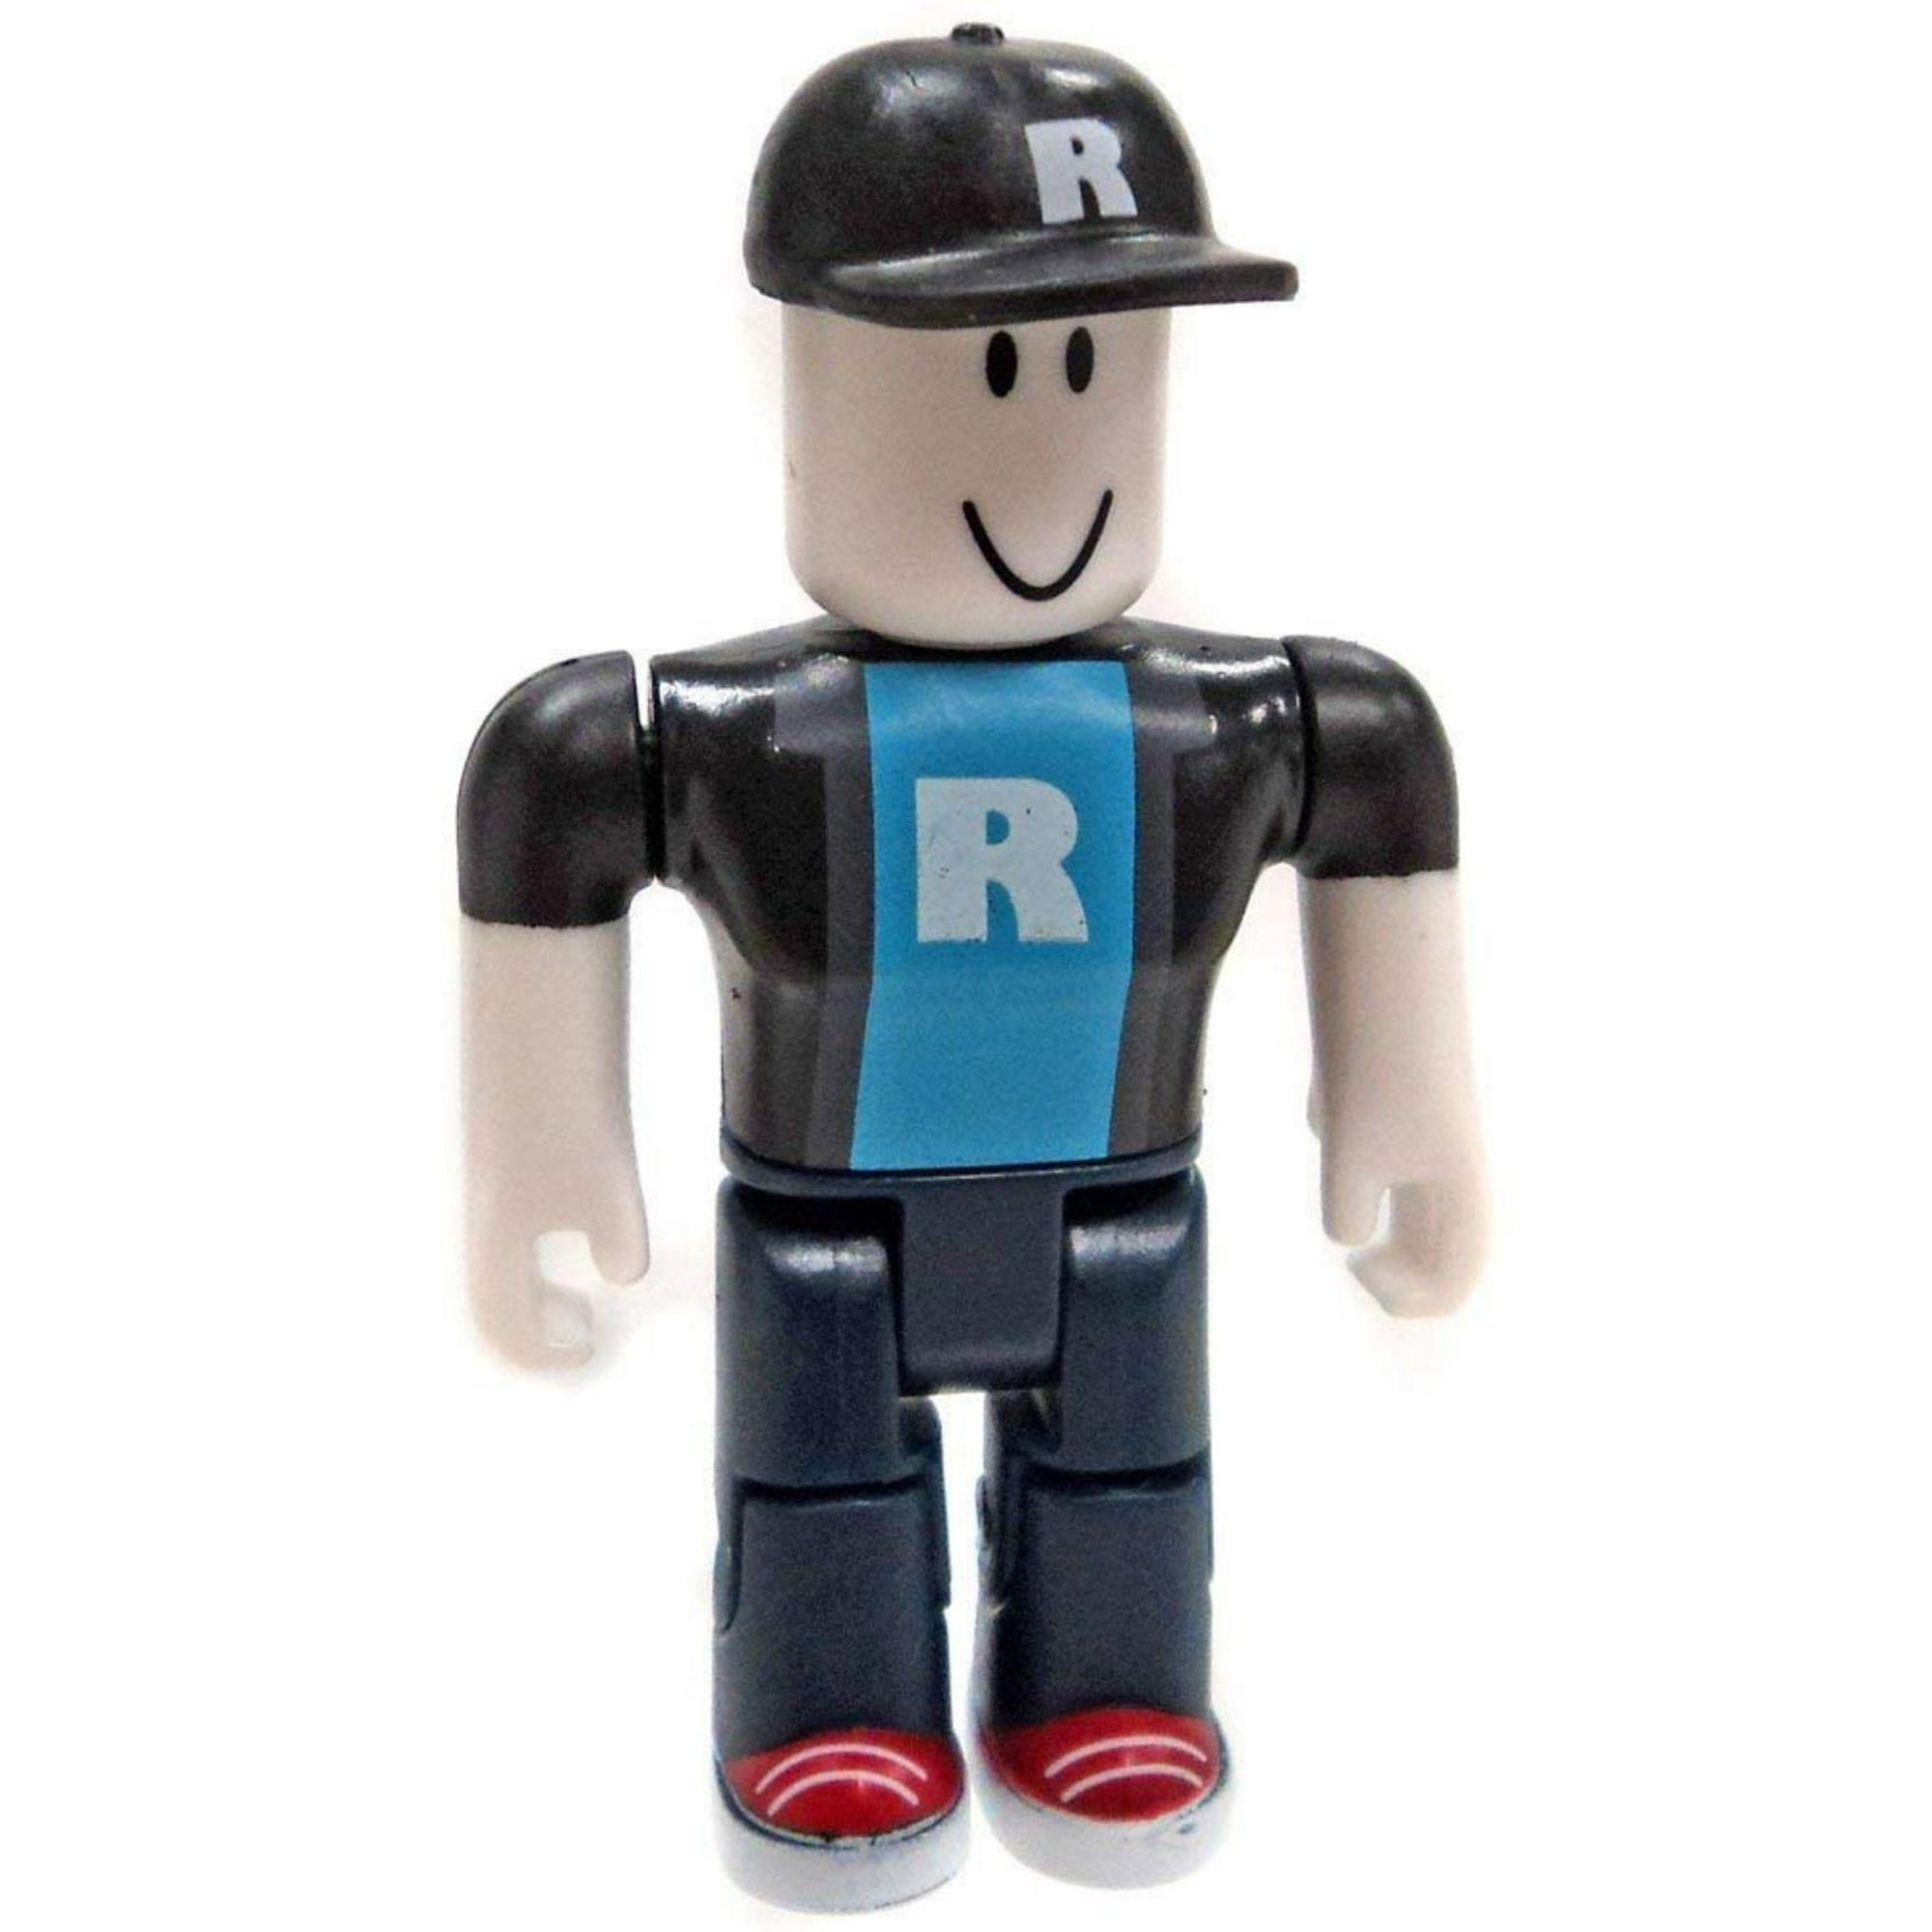 Roblox Series 2 Roblox Super Fan Action Figure Mystery Box Virtual Item Code 2 5 Figure Comes As Pictured With Online Code By Jazwares Walmart Com Walmart Com - roblox jazwares free codes